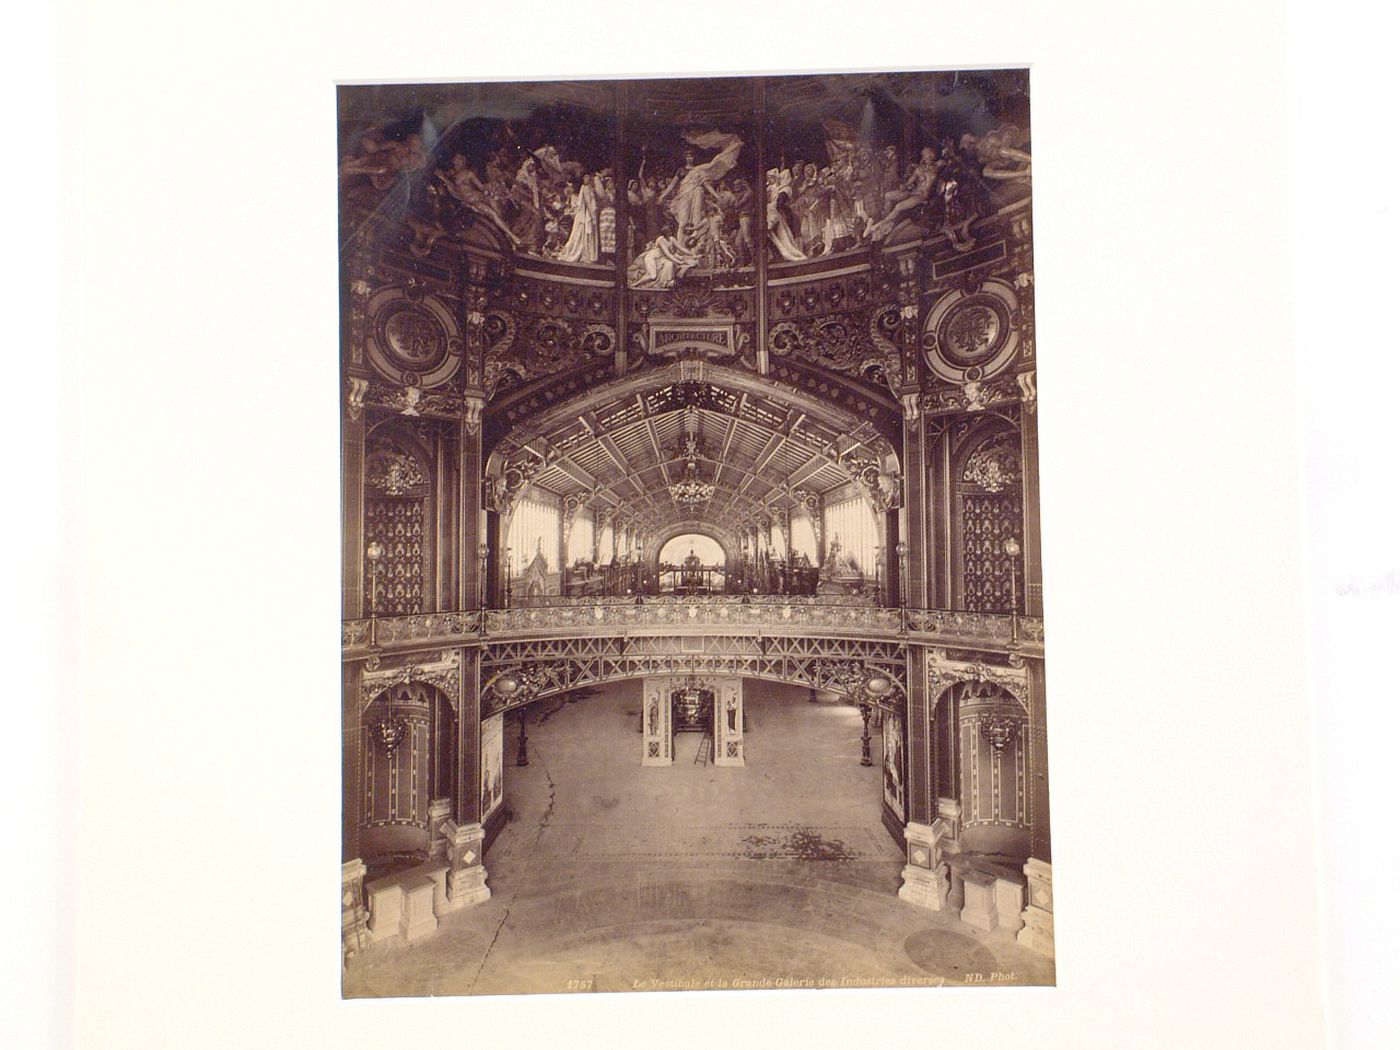 Interior view of exhibition hall, Paris Exposition of 1889 or 1900, Paris, France